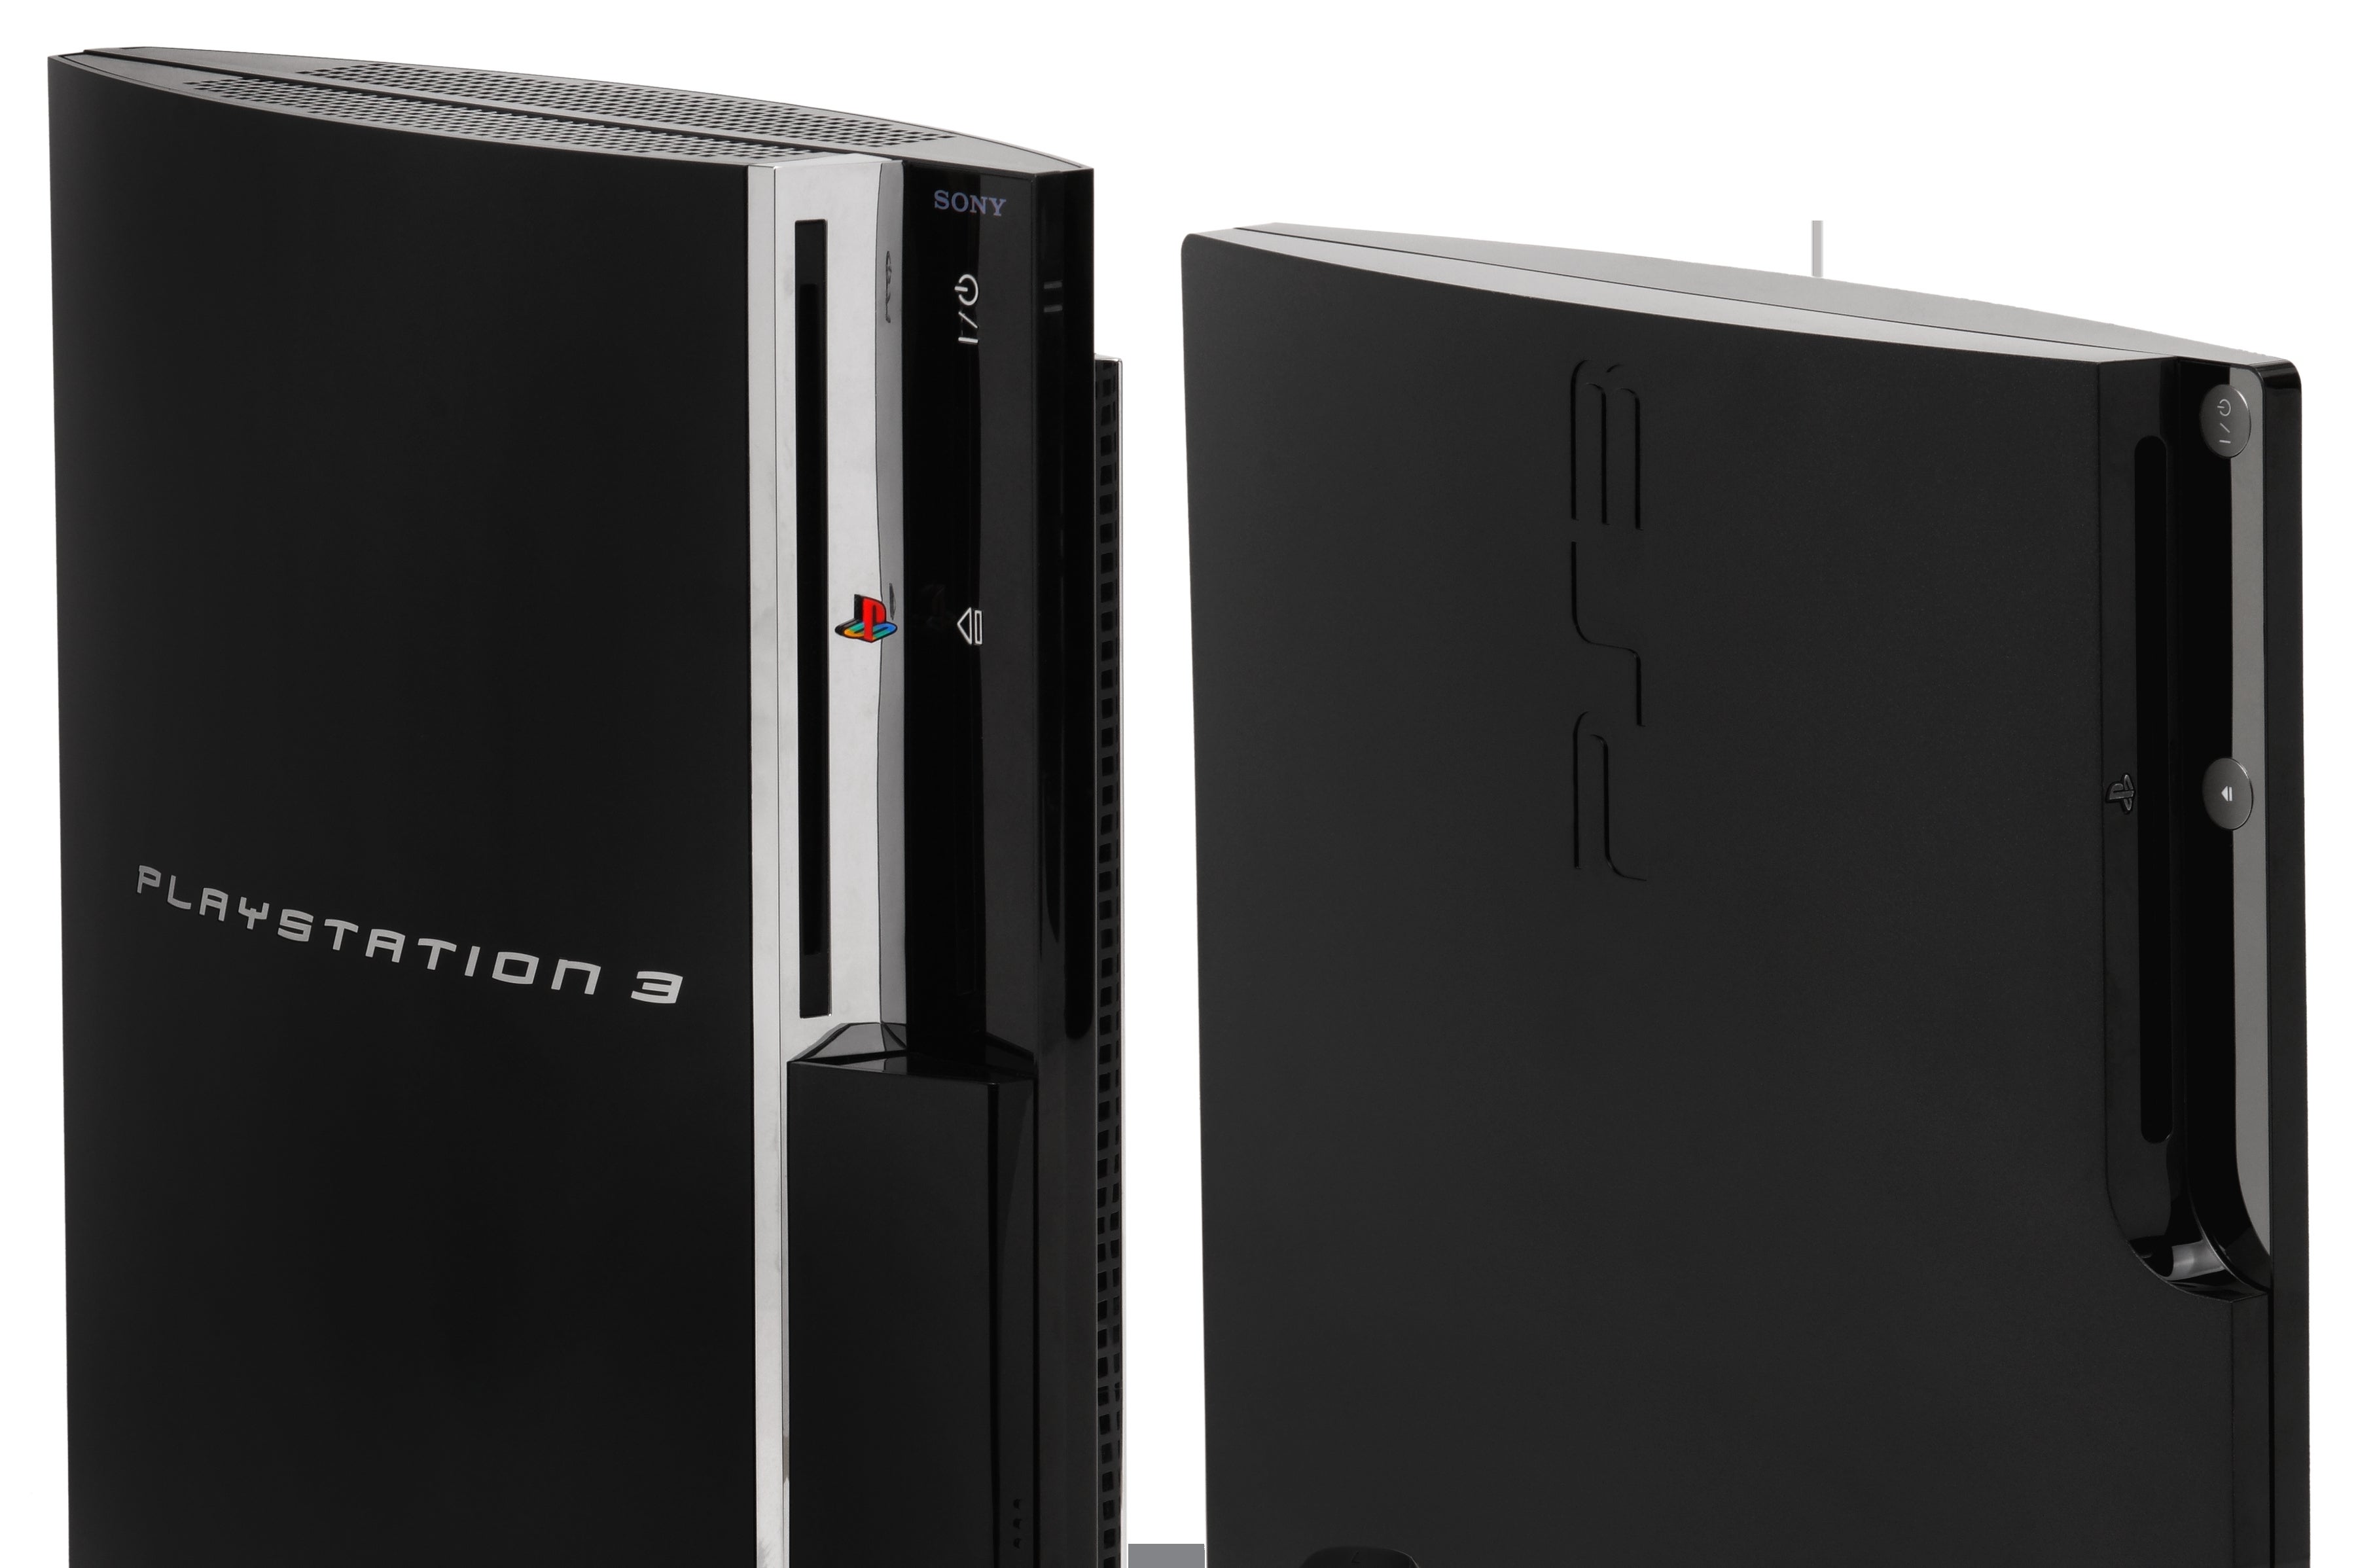 Image for PlayStation 3 sales hit 80 million